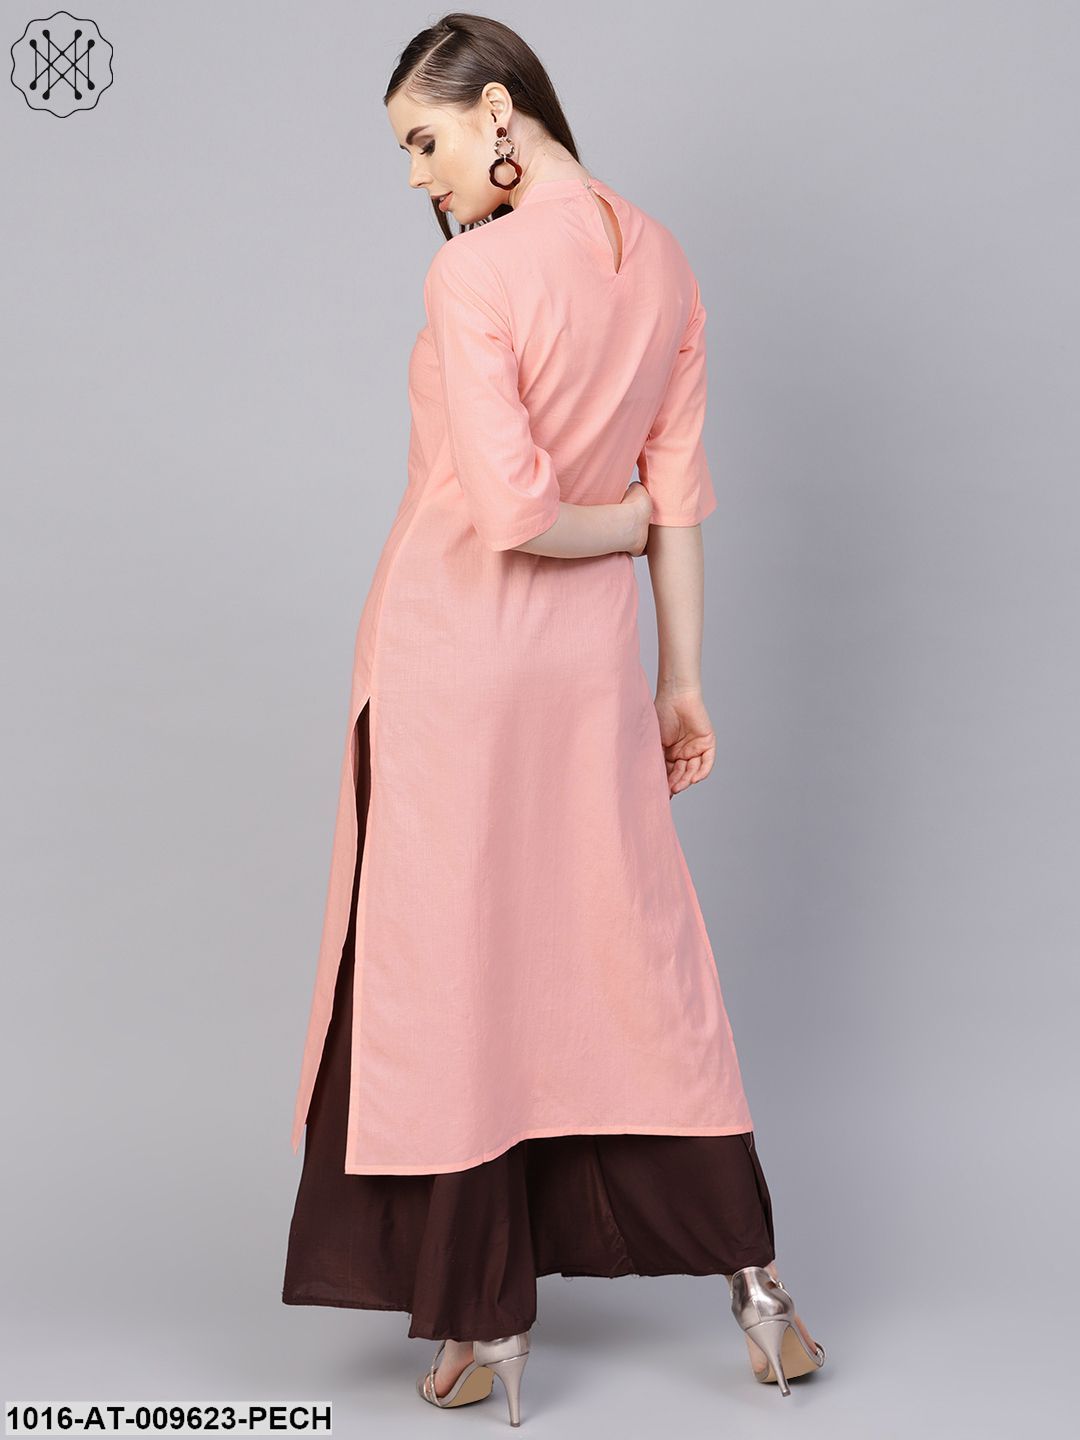 Solid Peach Kurta With Closed Collar And Pleats In Yoke